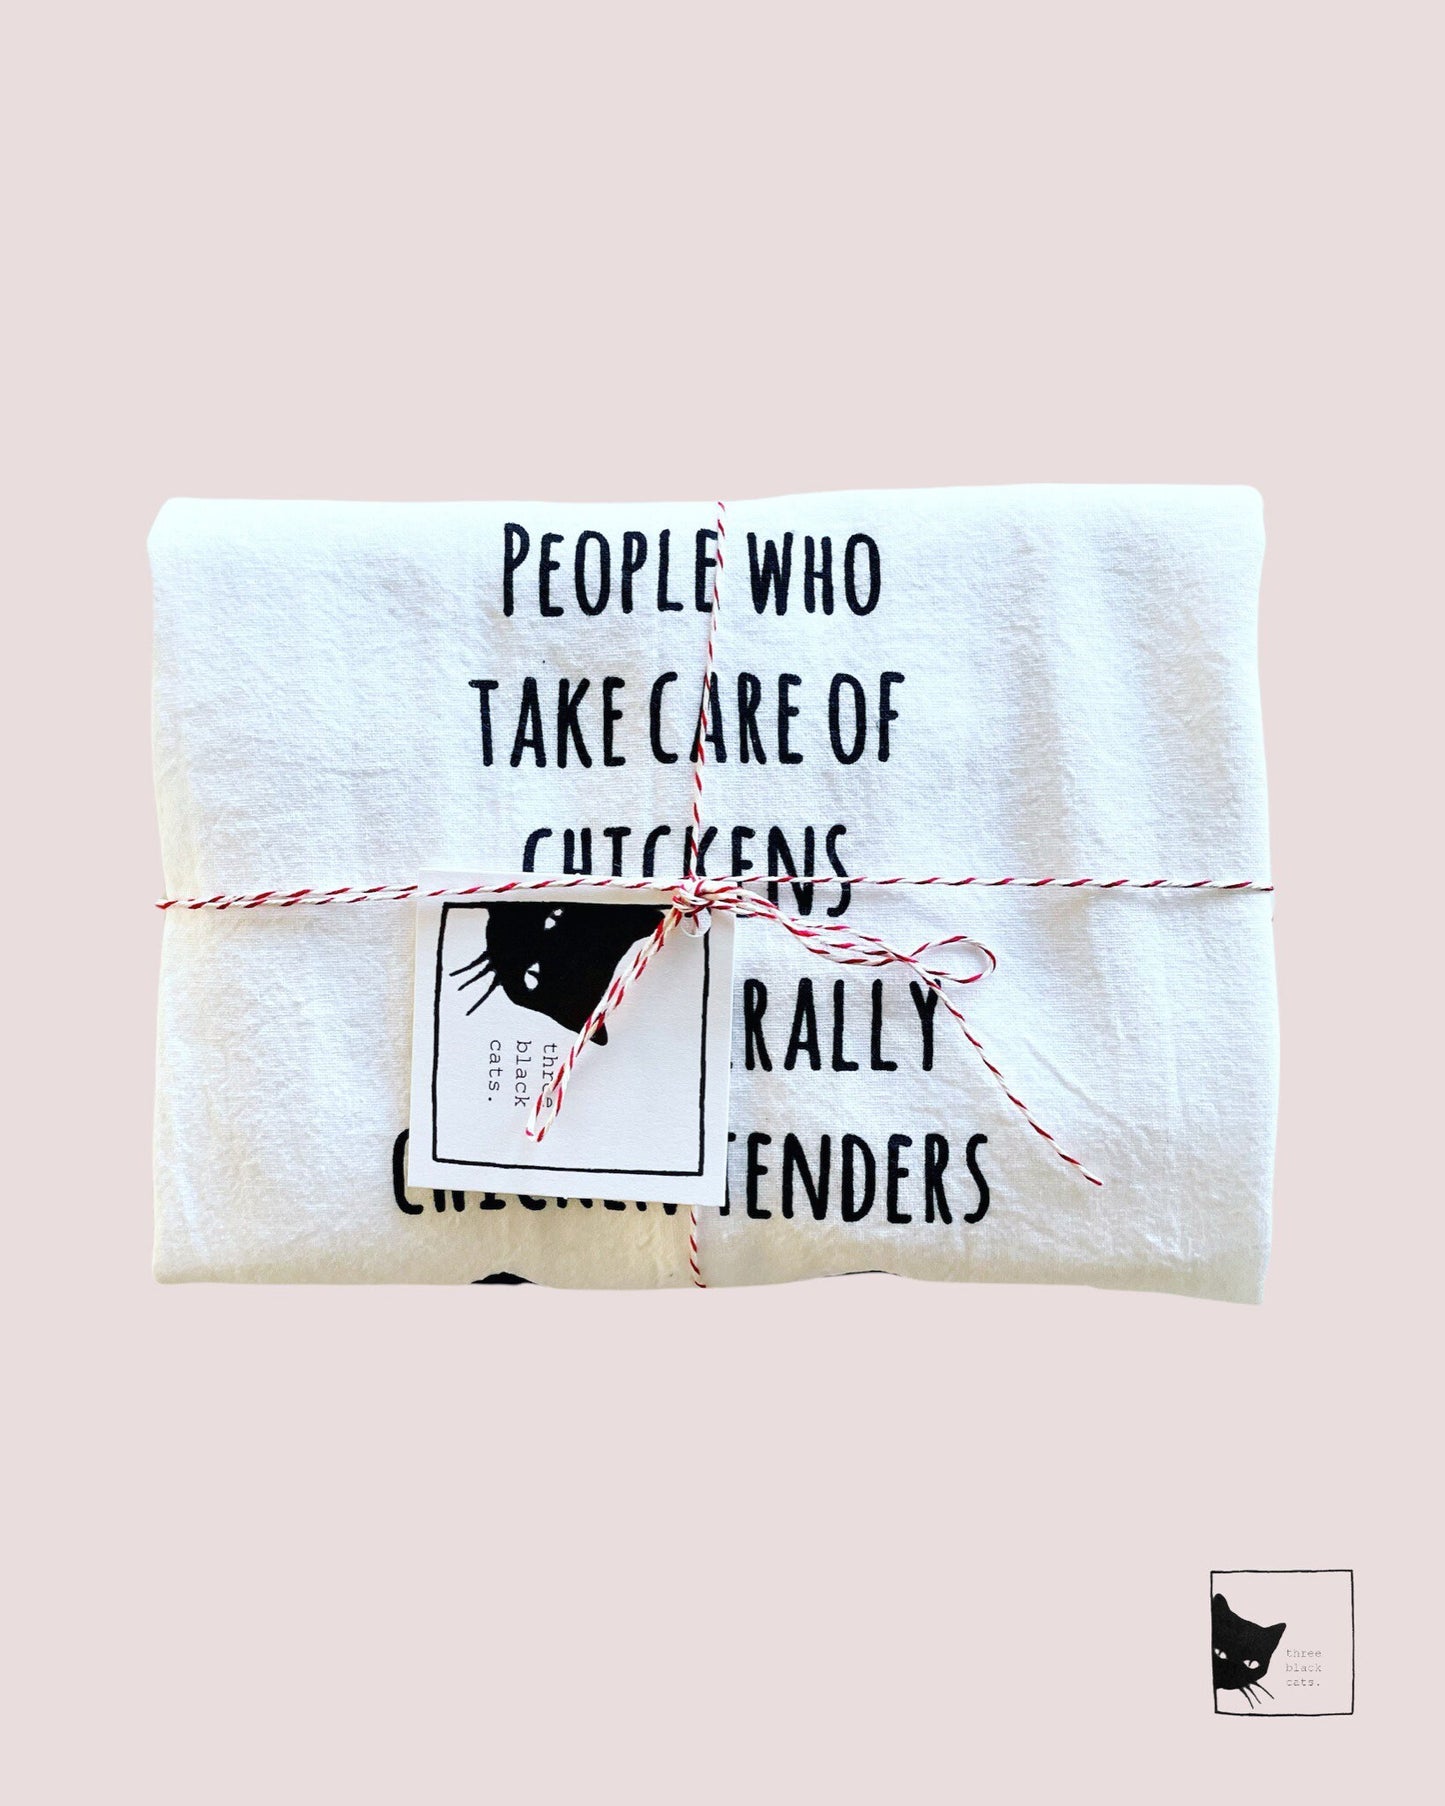 People who take care of chickens are literally Called chicken tenders, Tea Towel & Or Ornament